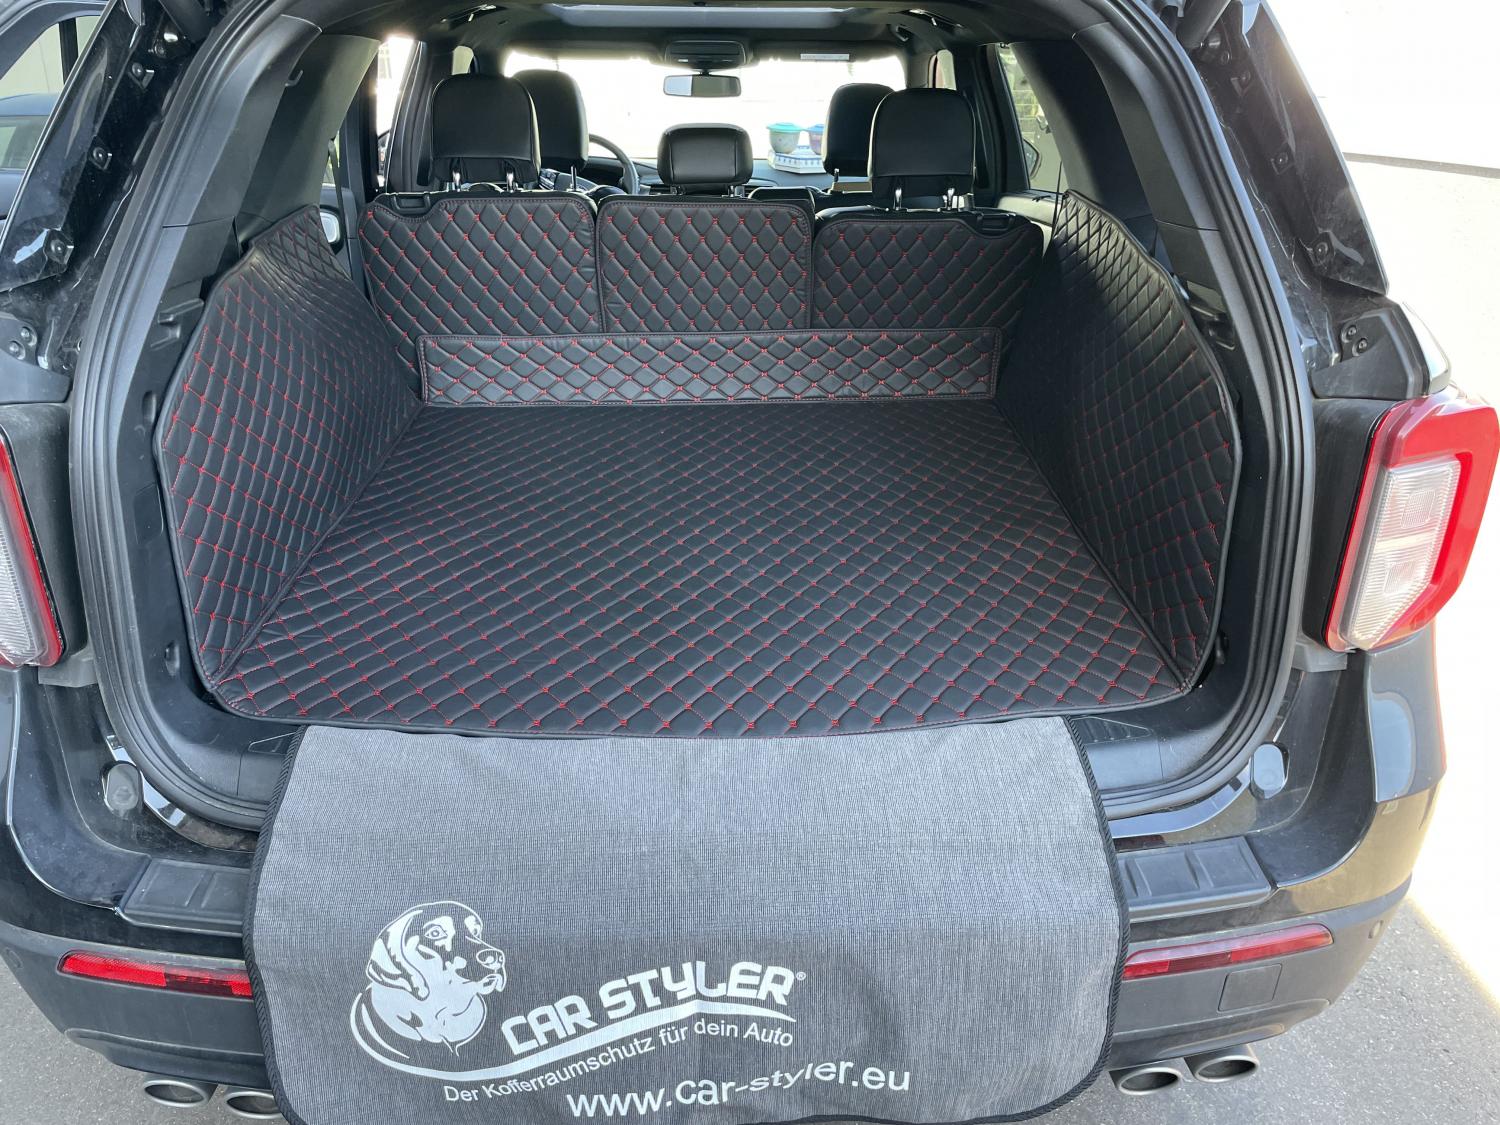 CARSTYLER® Easy Cover Geeignet Für Ford Mustang Mach-E AWD